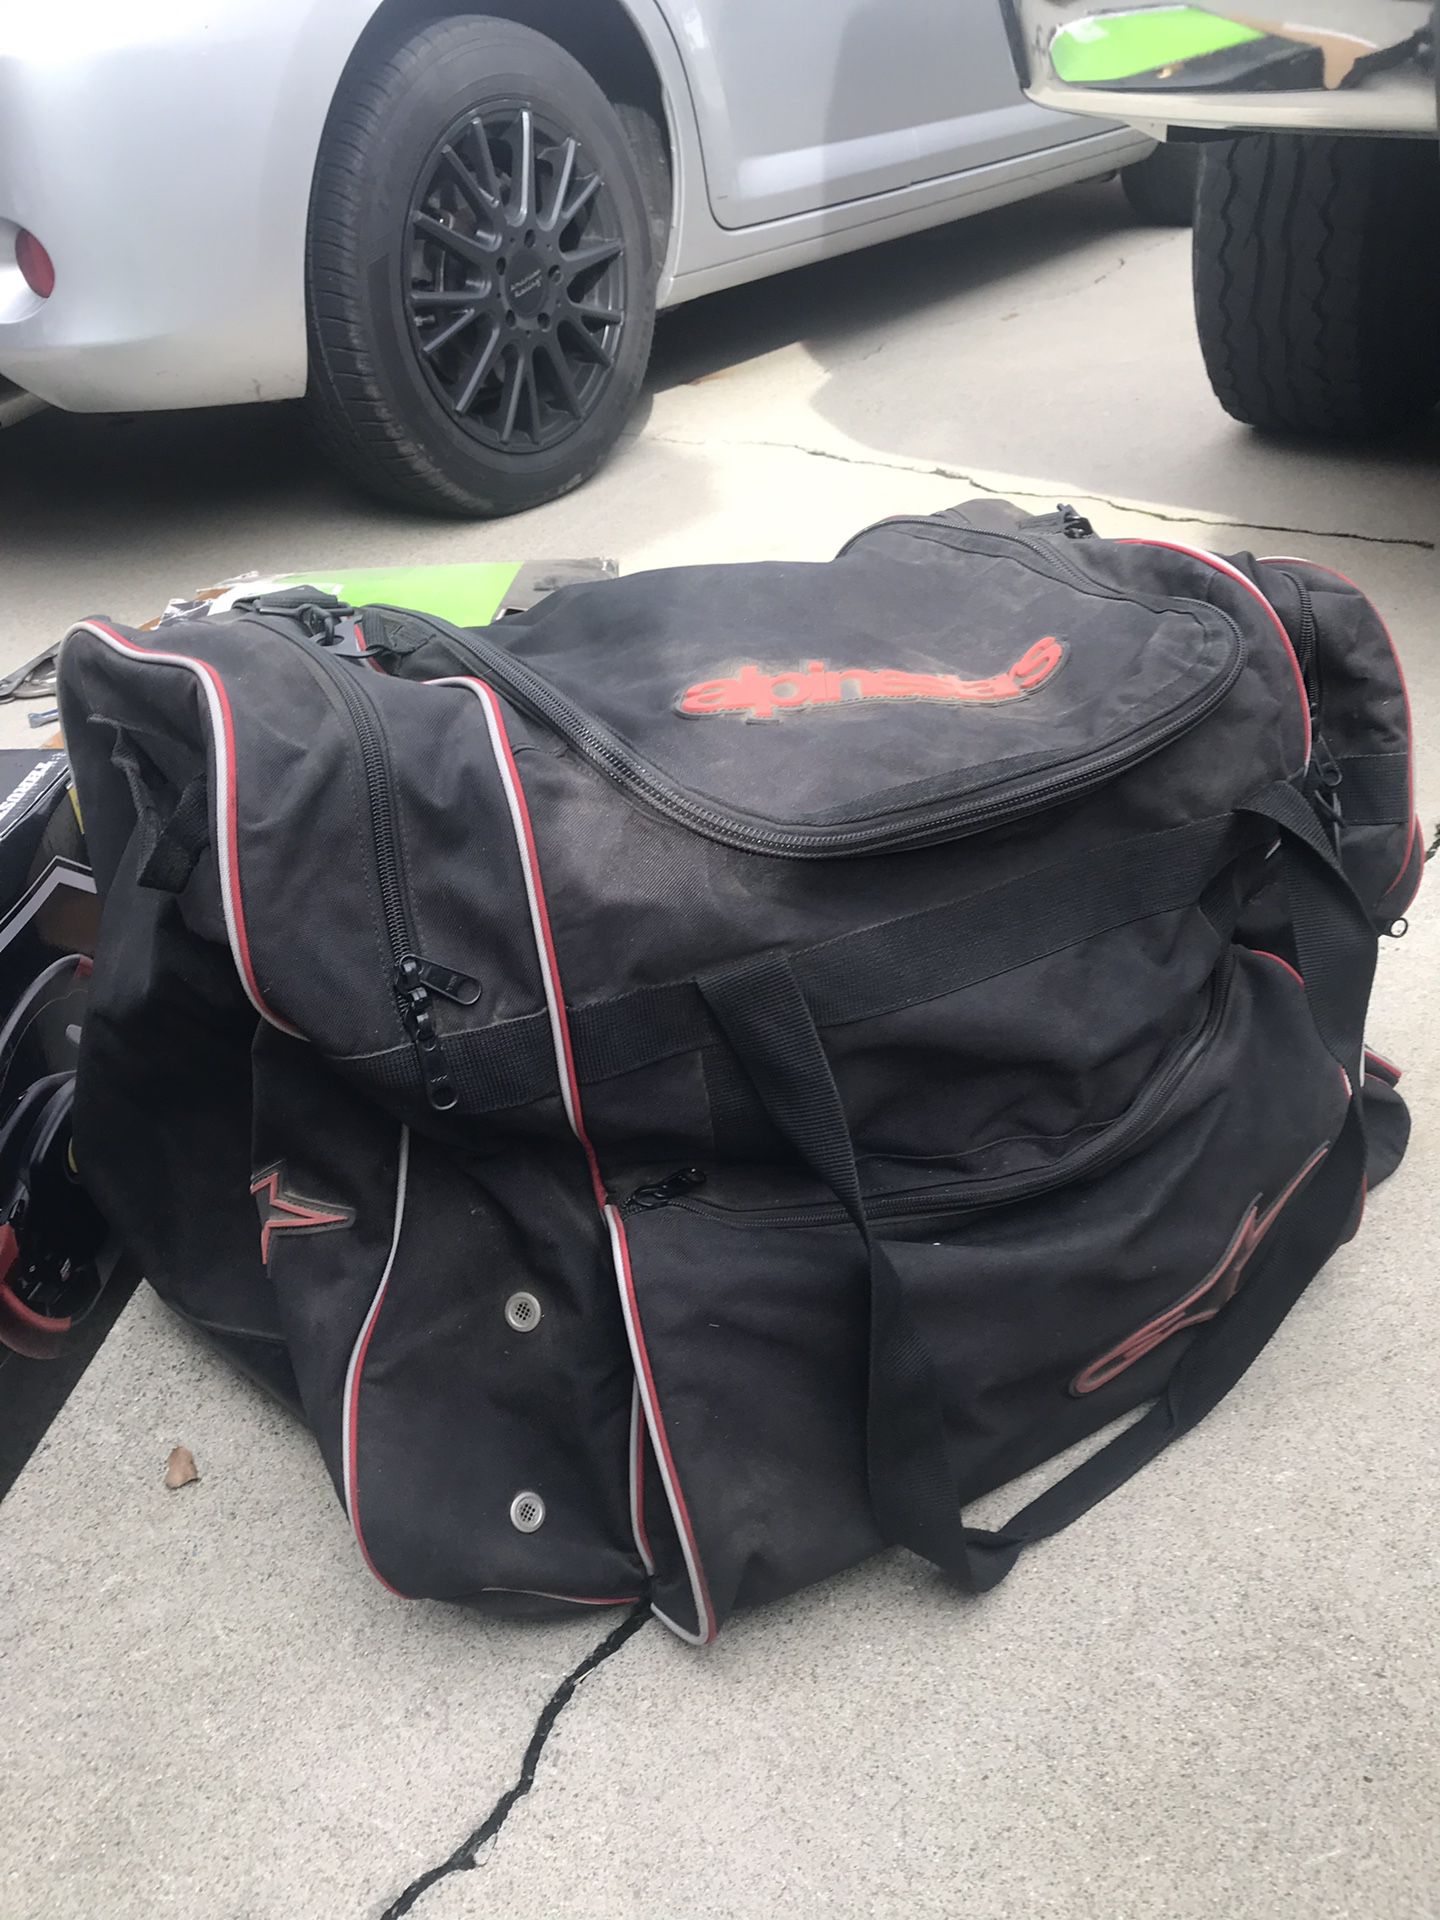 Motorcycle/ Dirt bike gear bag and misc.